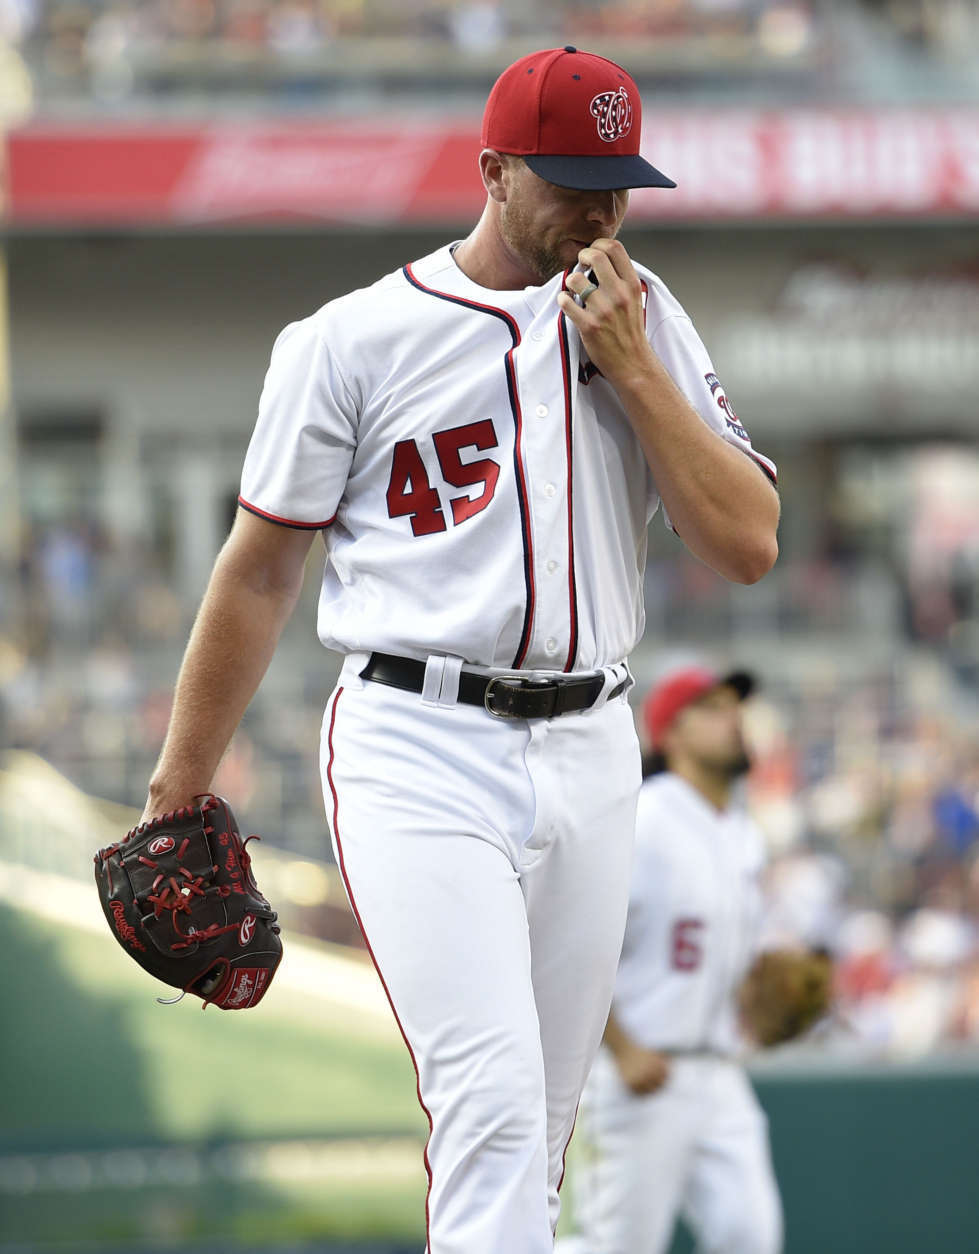 Washington Nationals relief pitcher Blake Treinen walks to the dugout after the top of the ninth inning of the team's baseball game against the Chicago Cubs, Thursday, June 29, 2017, in Washington. The Cubs won 5-4. (AP Photo/Nick Wass)